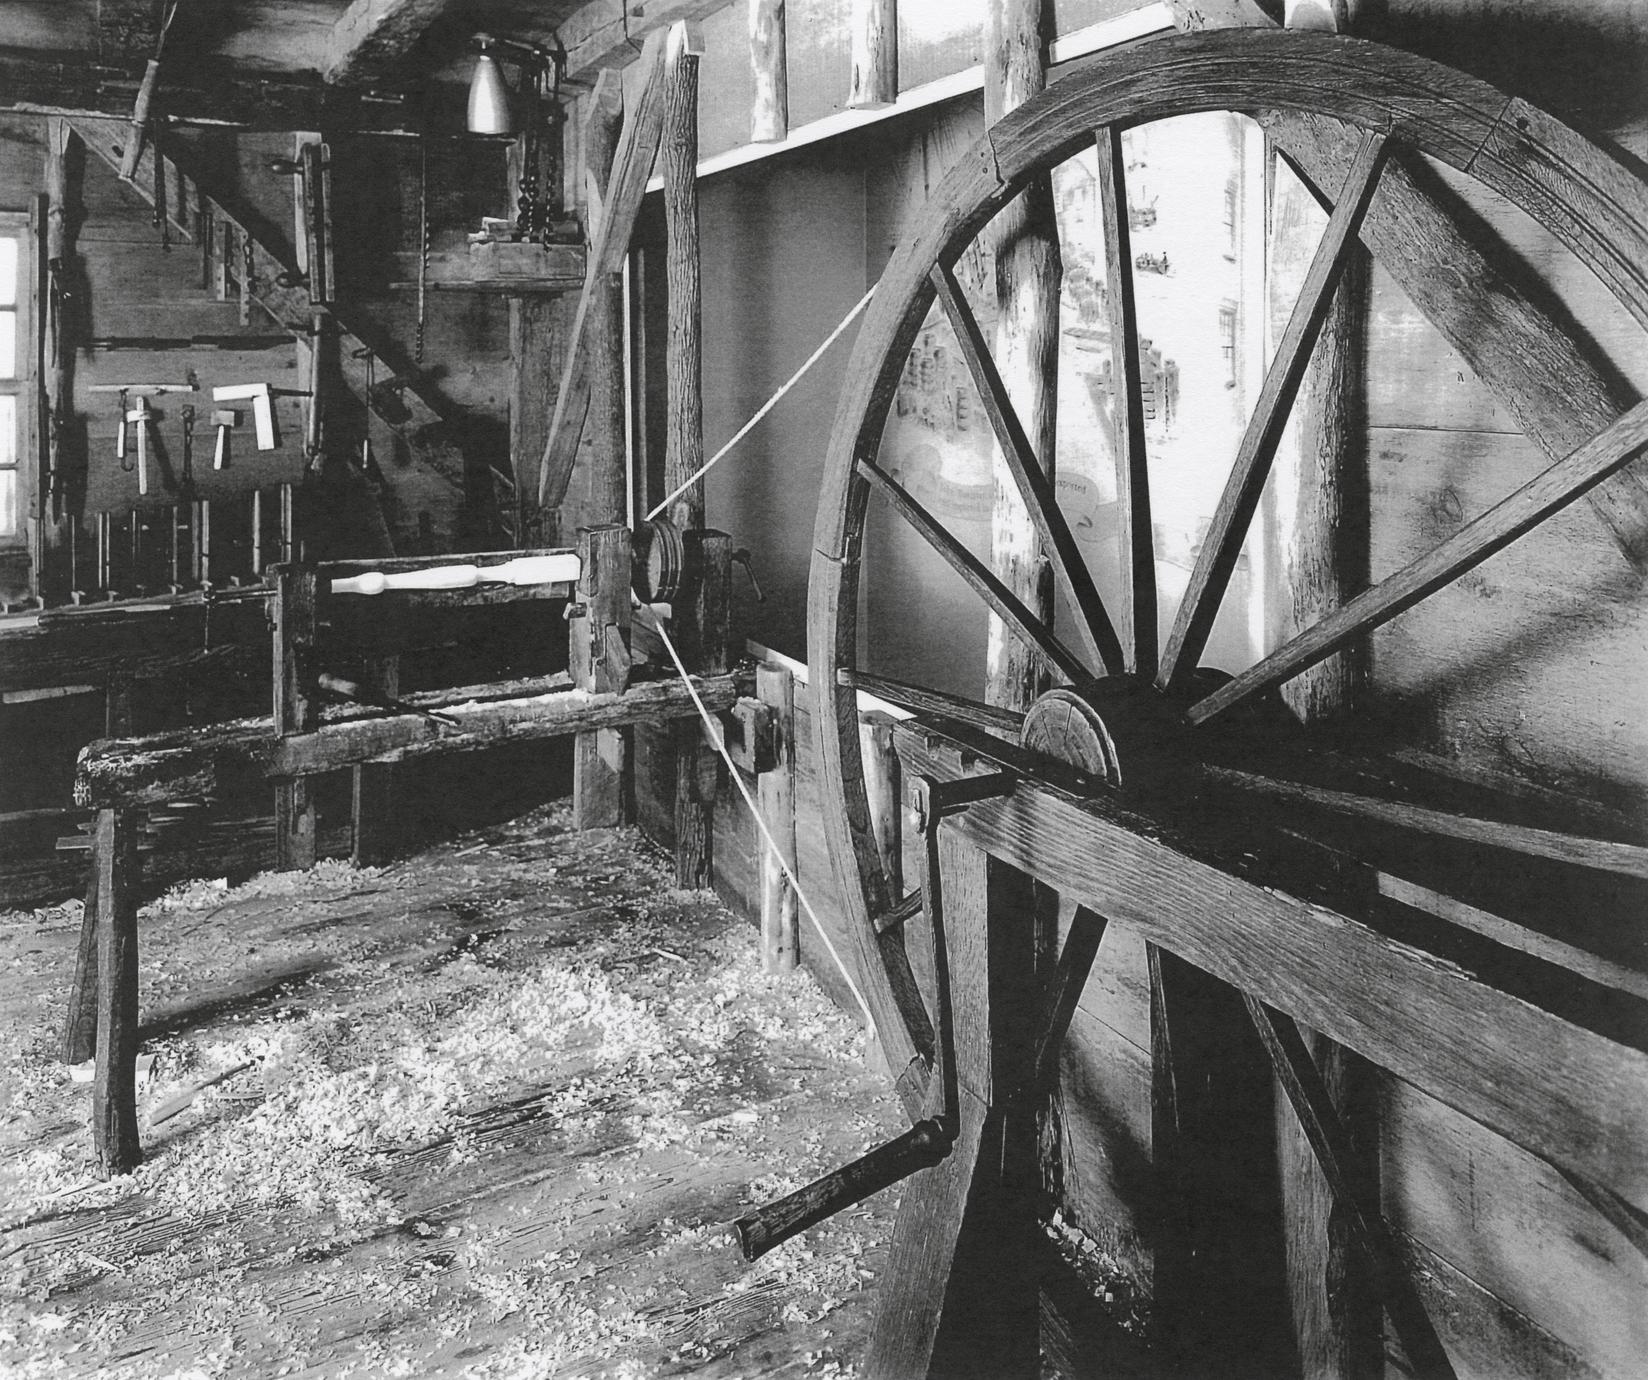 Black and white photograph of the great wheel lathe